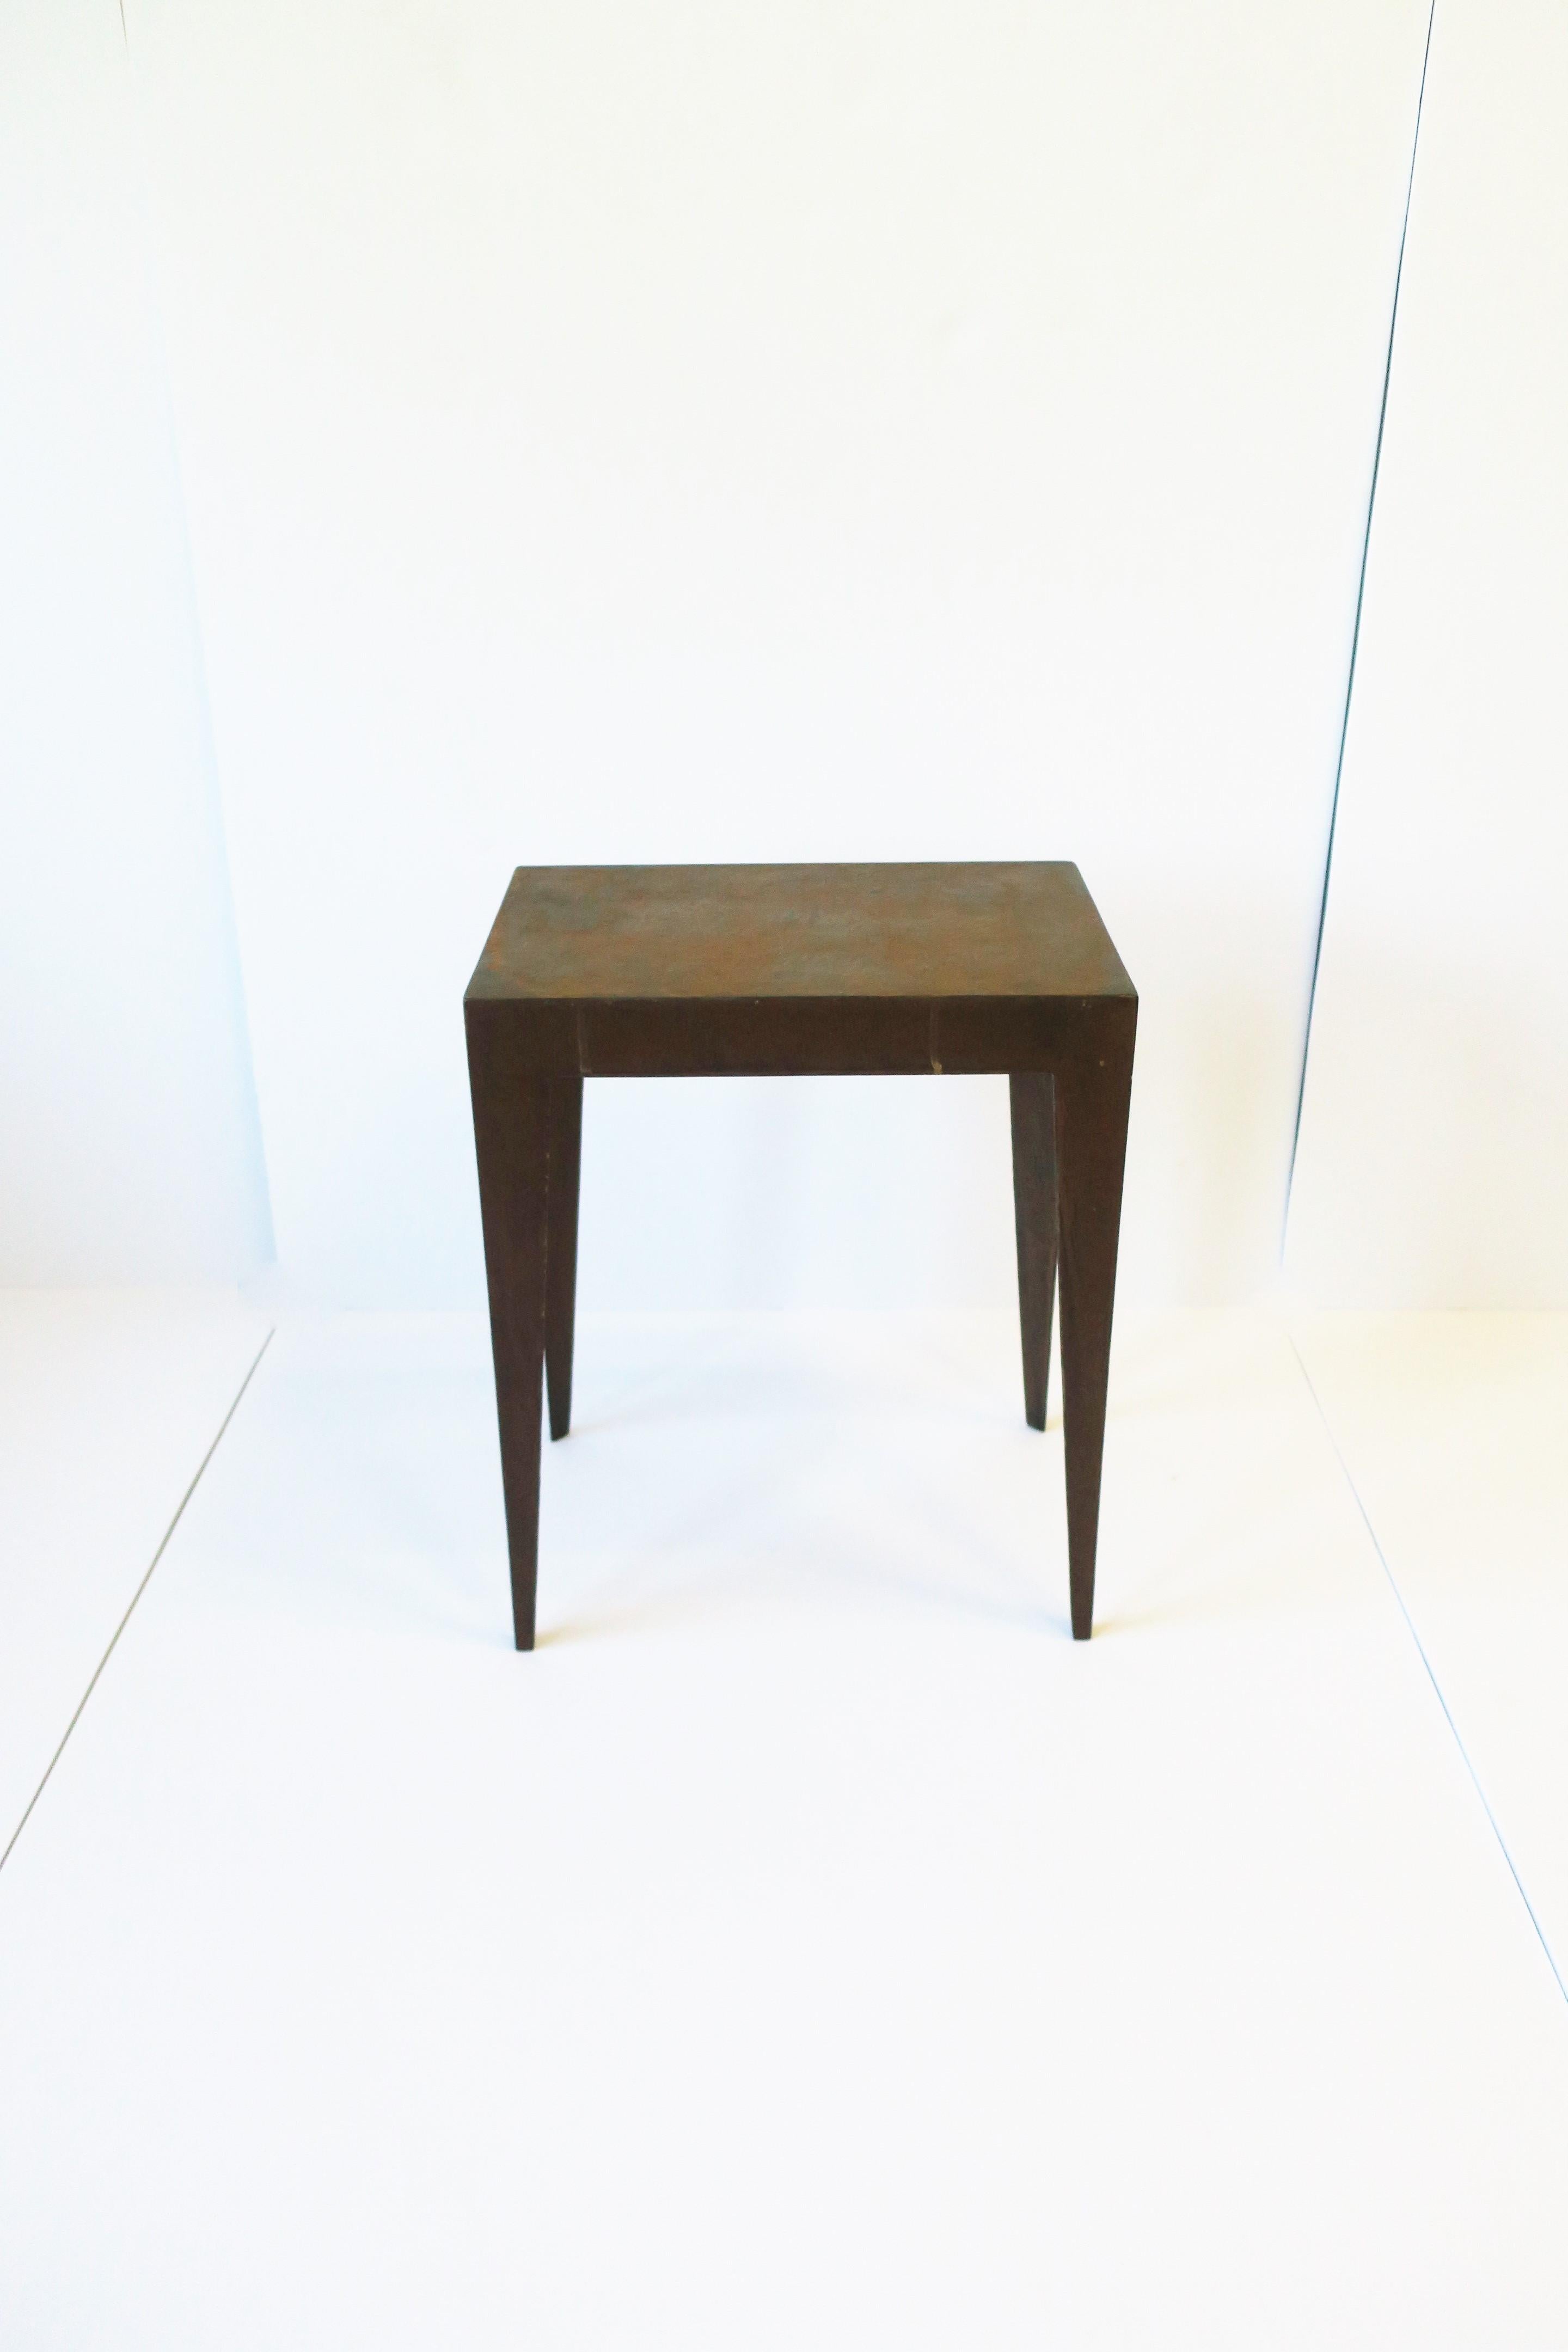 Minimalist Metal Side End Drinks Table with Art Deco Influence In Good Condition For Sale In New York, NY